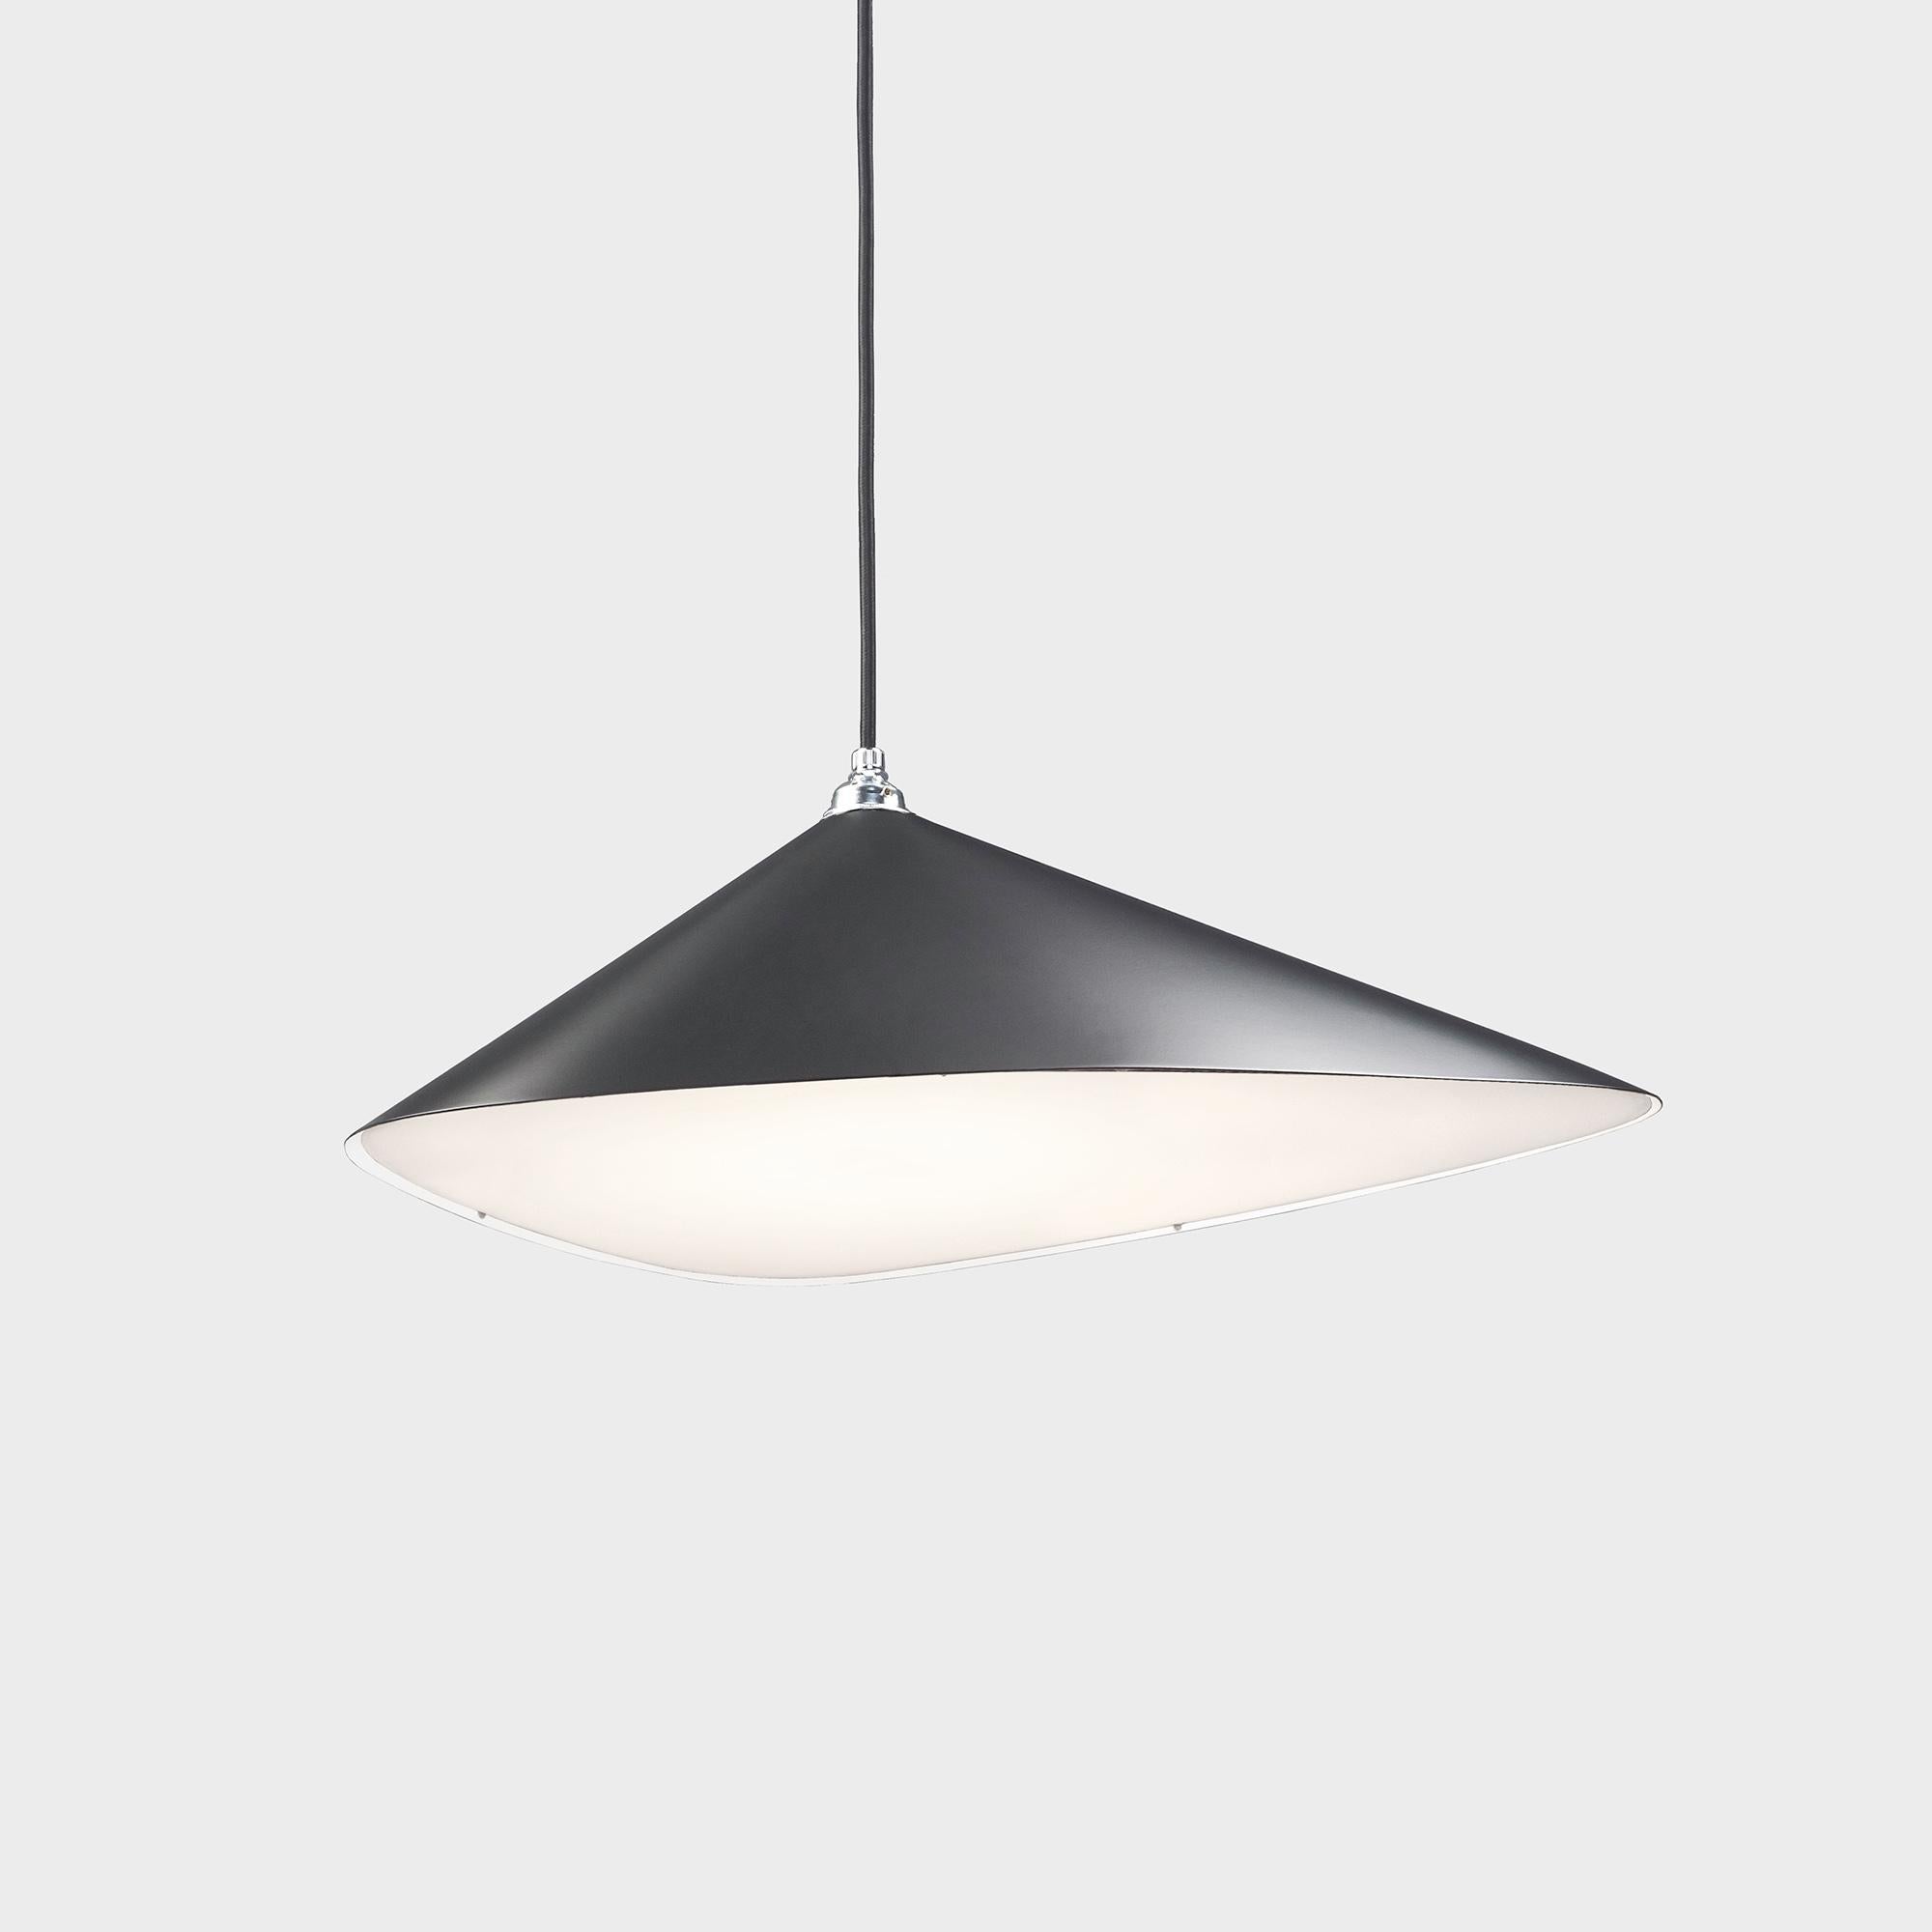 Daniel Becker 'Emily I' Pendant Lamp in Anthracite For Moss Objects. Designed by Berlin luminary Daniel Becker and handmade to order using mid-century manufacturing techniques. Executed in high-quality sheet metal with up to ten layers glossy or